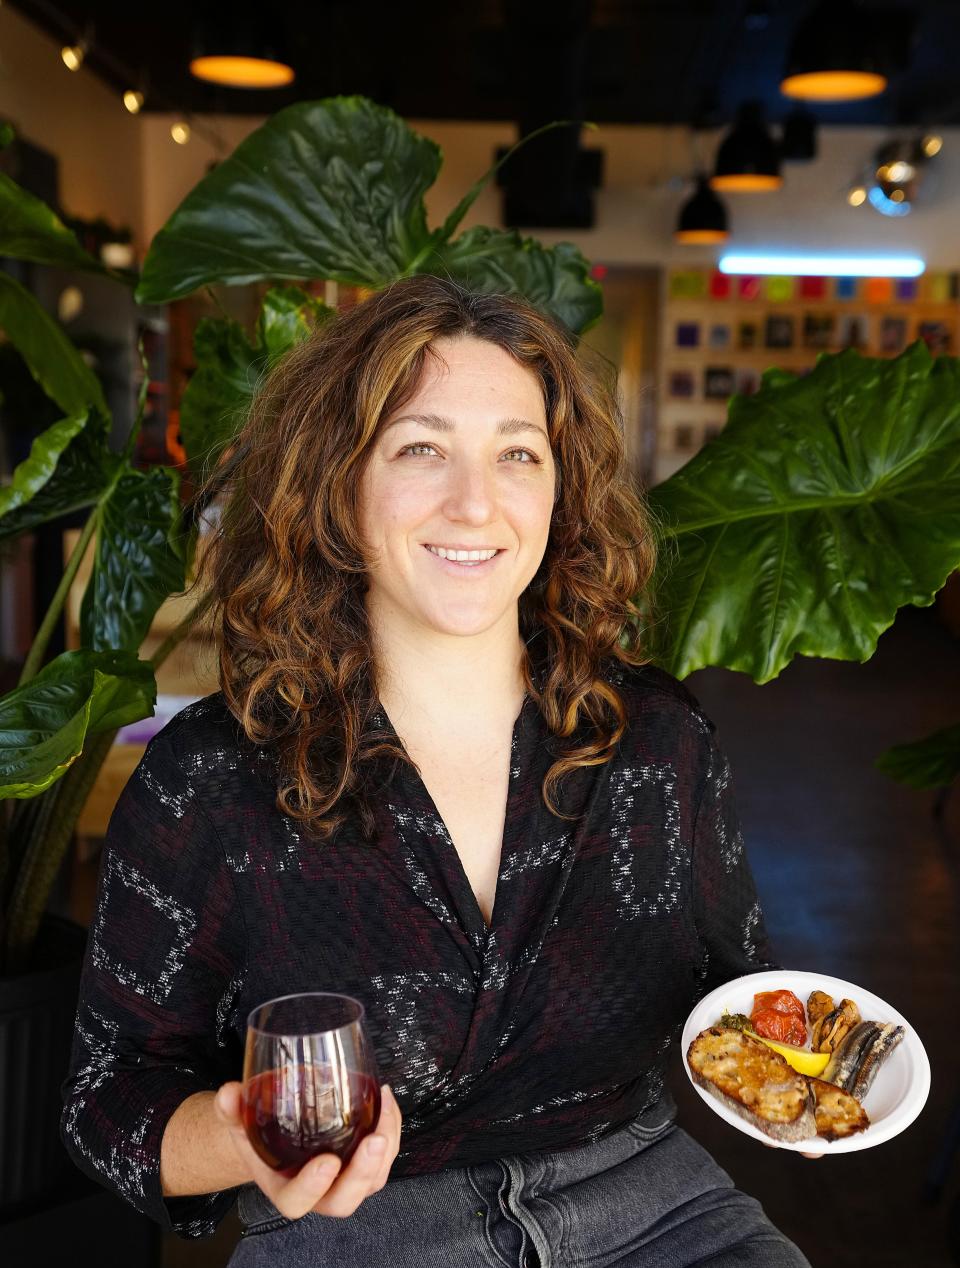 Chef Dana Arbel poses with her Boquerones dish and a glass of Dreamboat field blend wine at Central Records Wine Cafe in downtown Phoenix on Feb. 15, 2023.